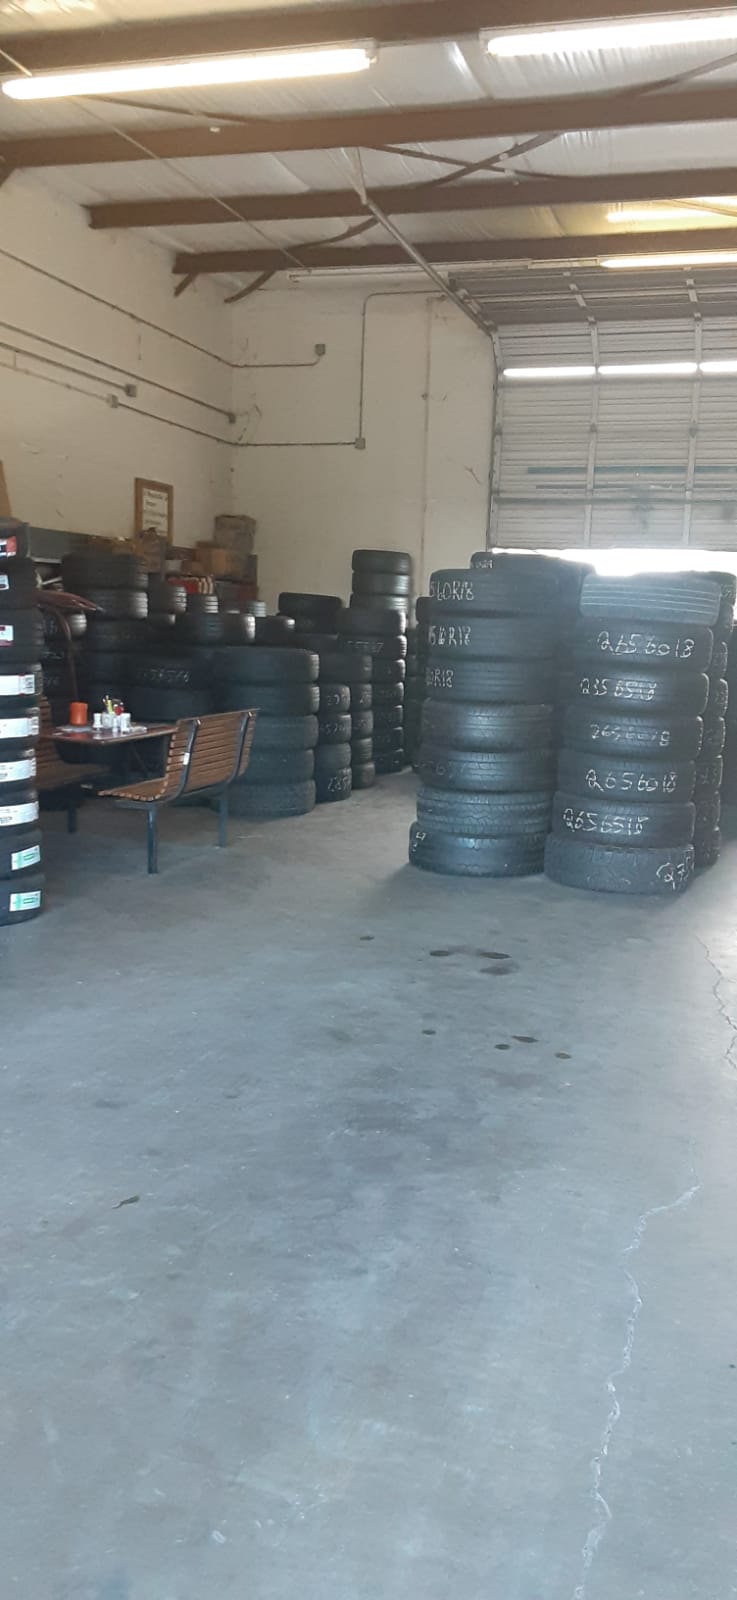 Two star tire shop | 402 S 3rd St, Mabank, TX 75147, USA | Phone: (571) 428-1347